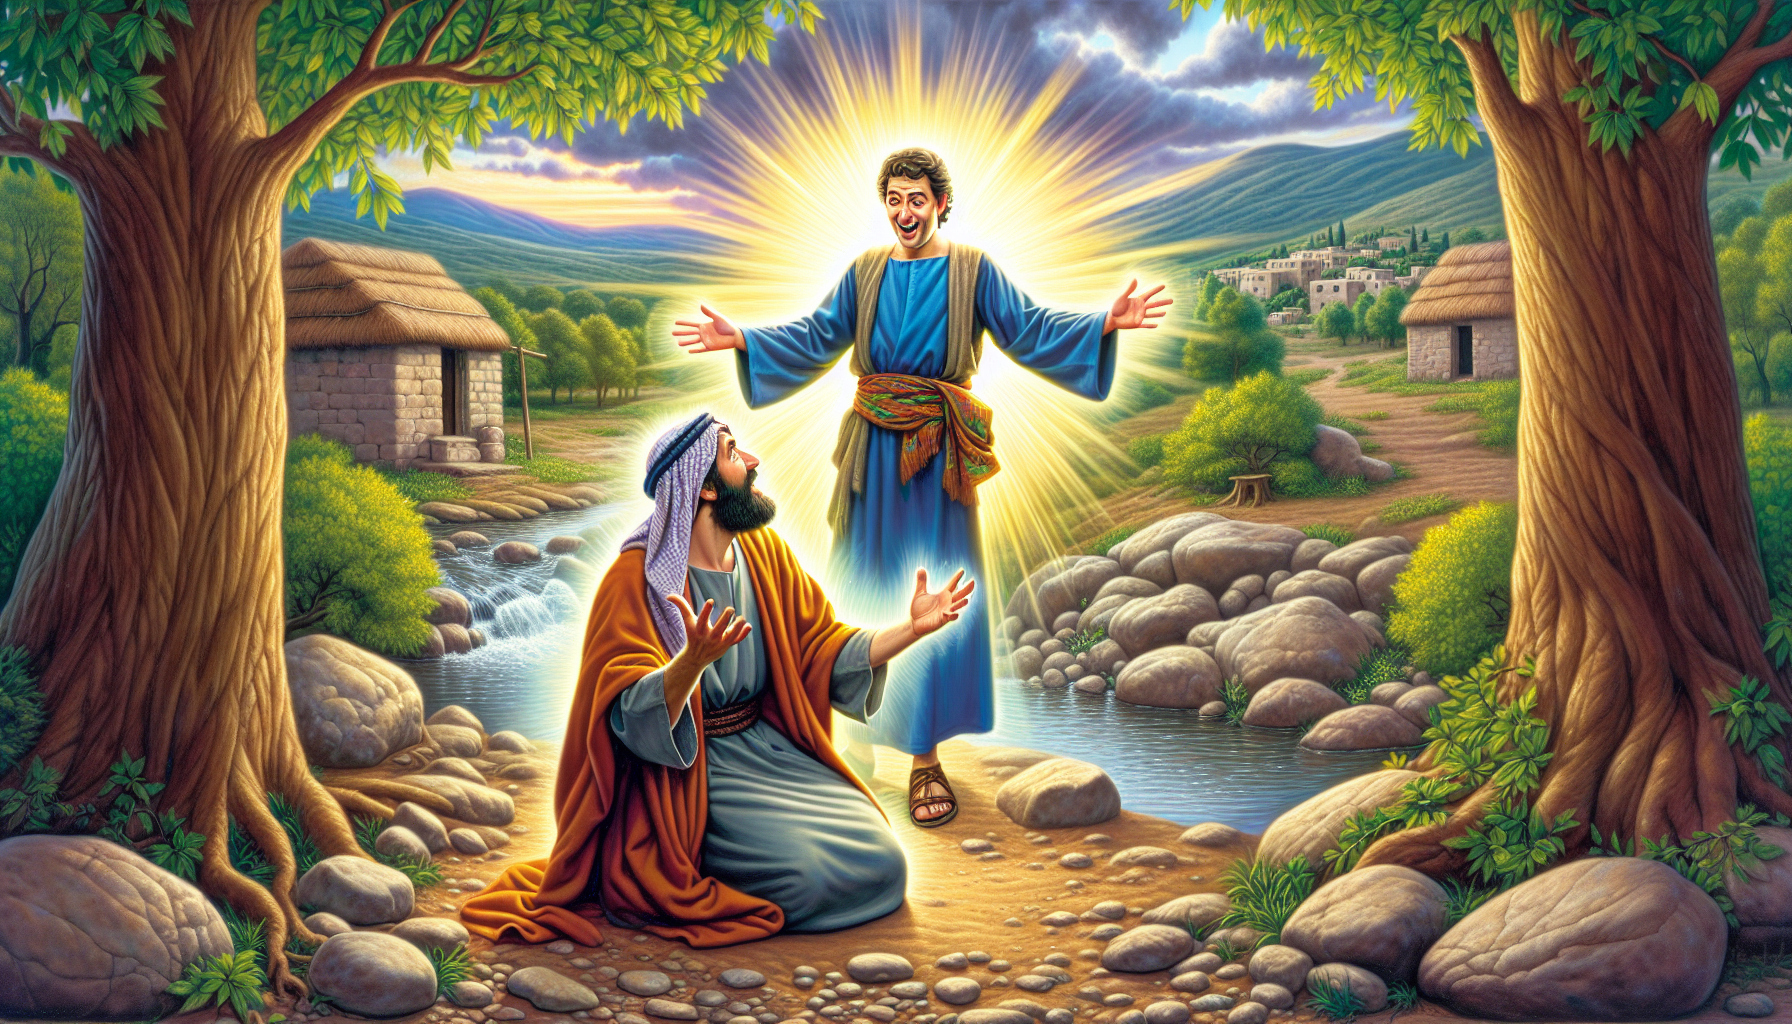 Create an image showing a biblical scene set in ancient Judea. In the center, depict Andrew with an excited and heartfelt expression, pointing towards Jesus as he introduces Him to his brother, Simon